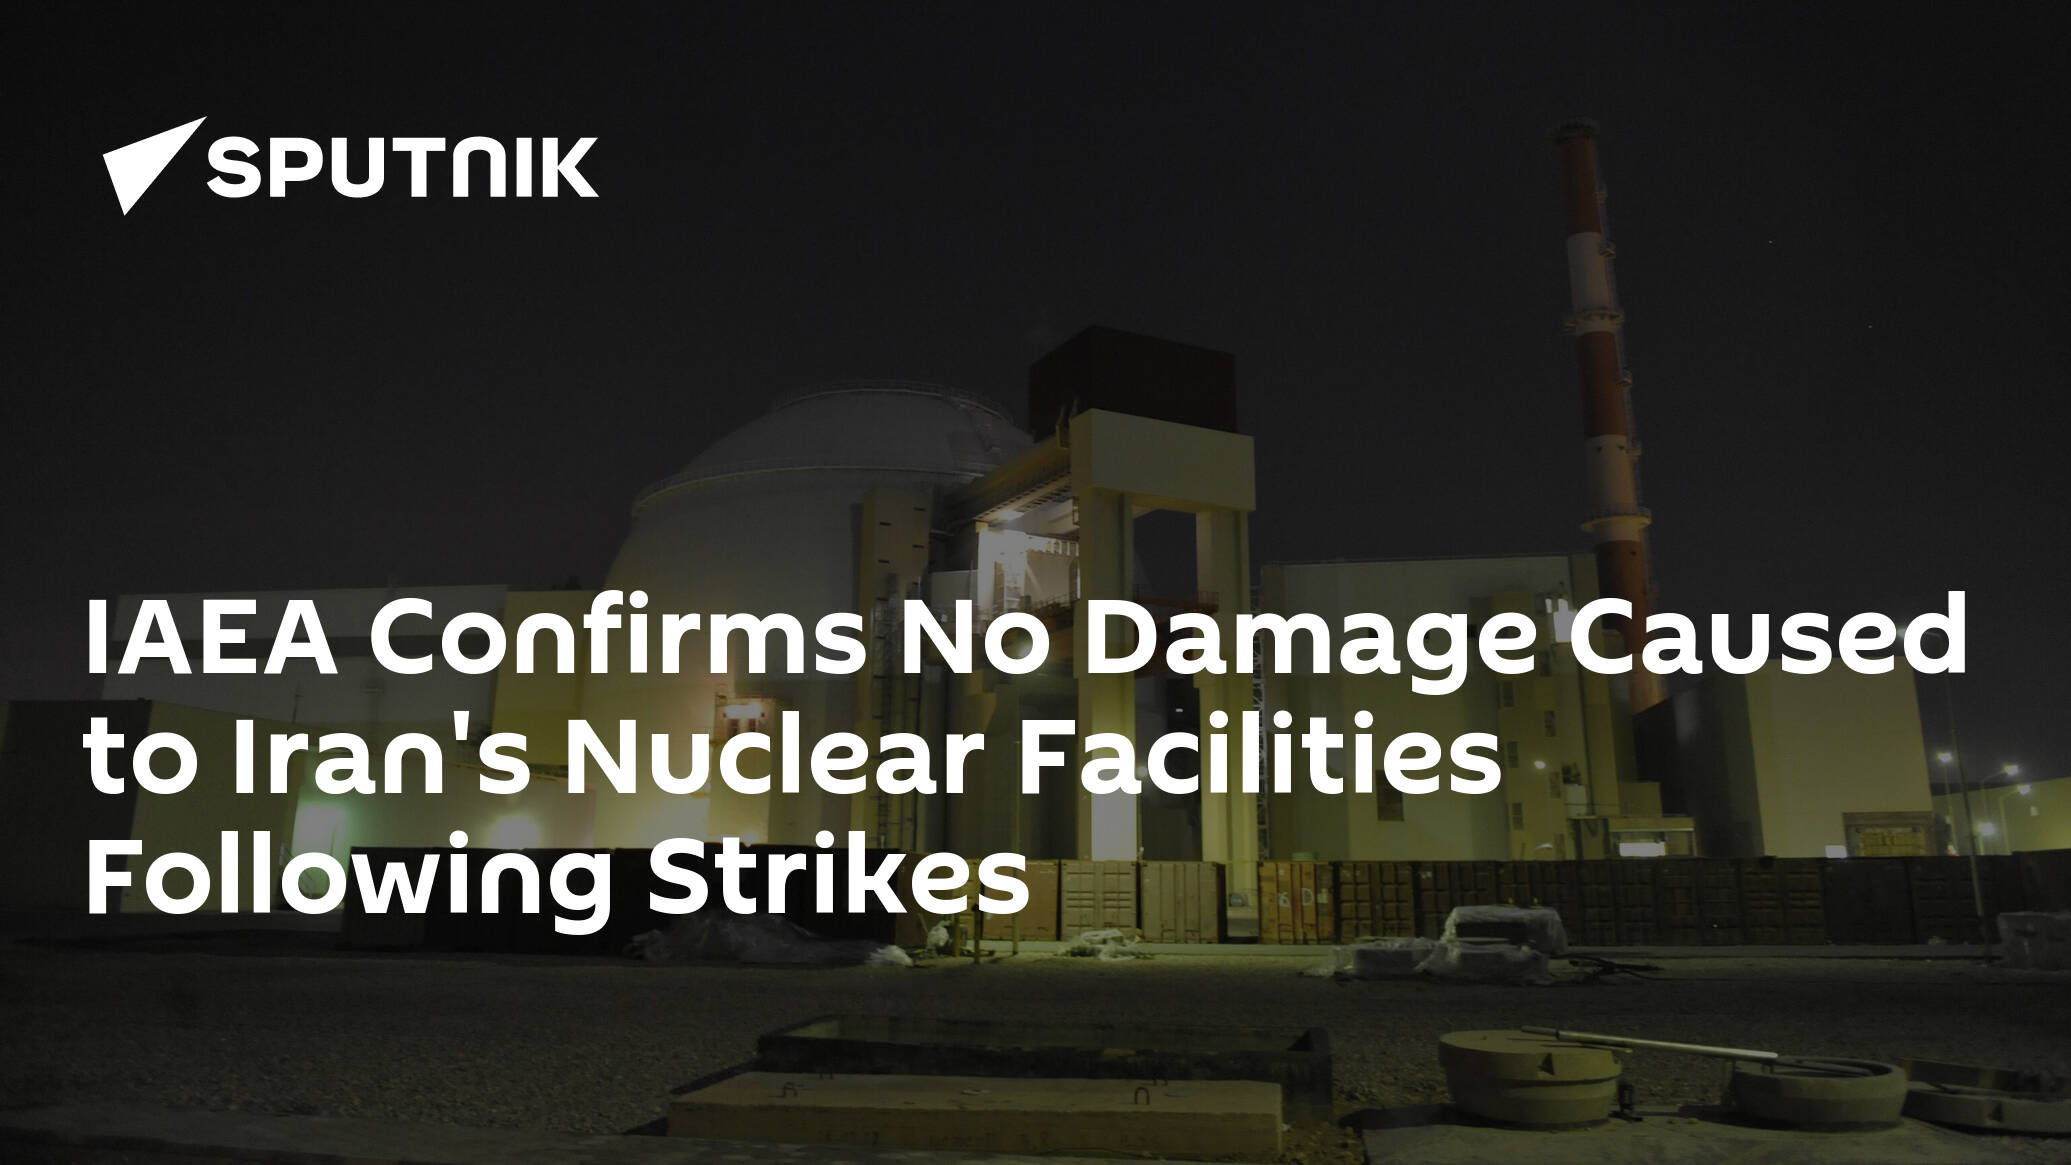 IAEA Confirms No Damage Caused to Iran's Nuclear Facilities Following Strikes